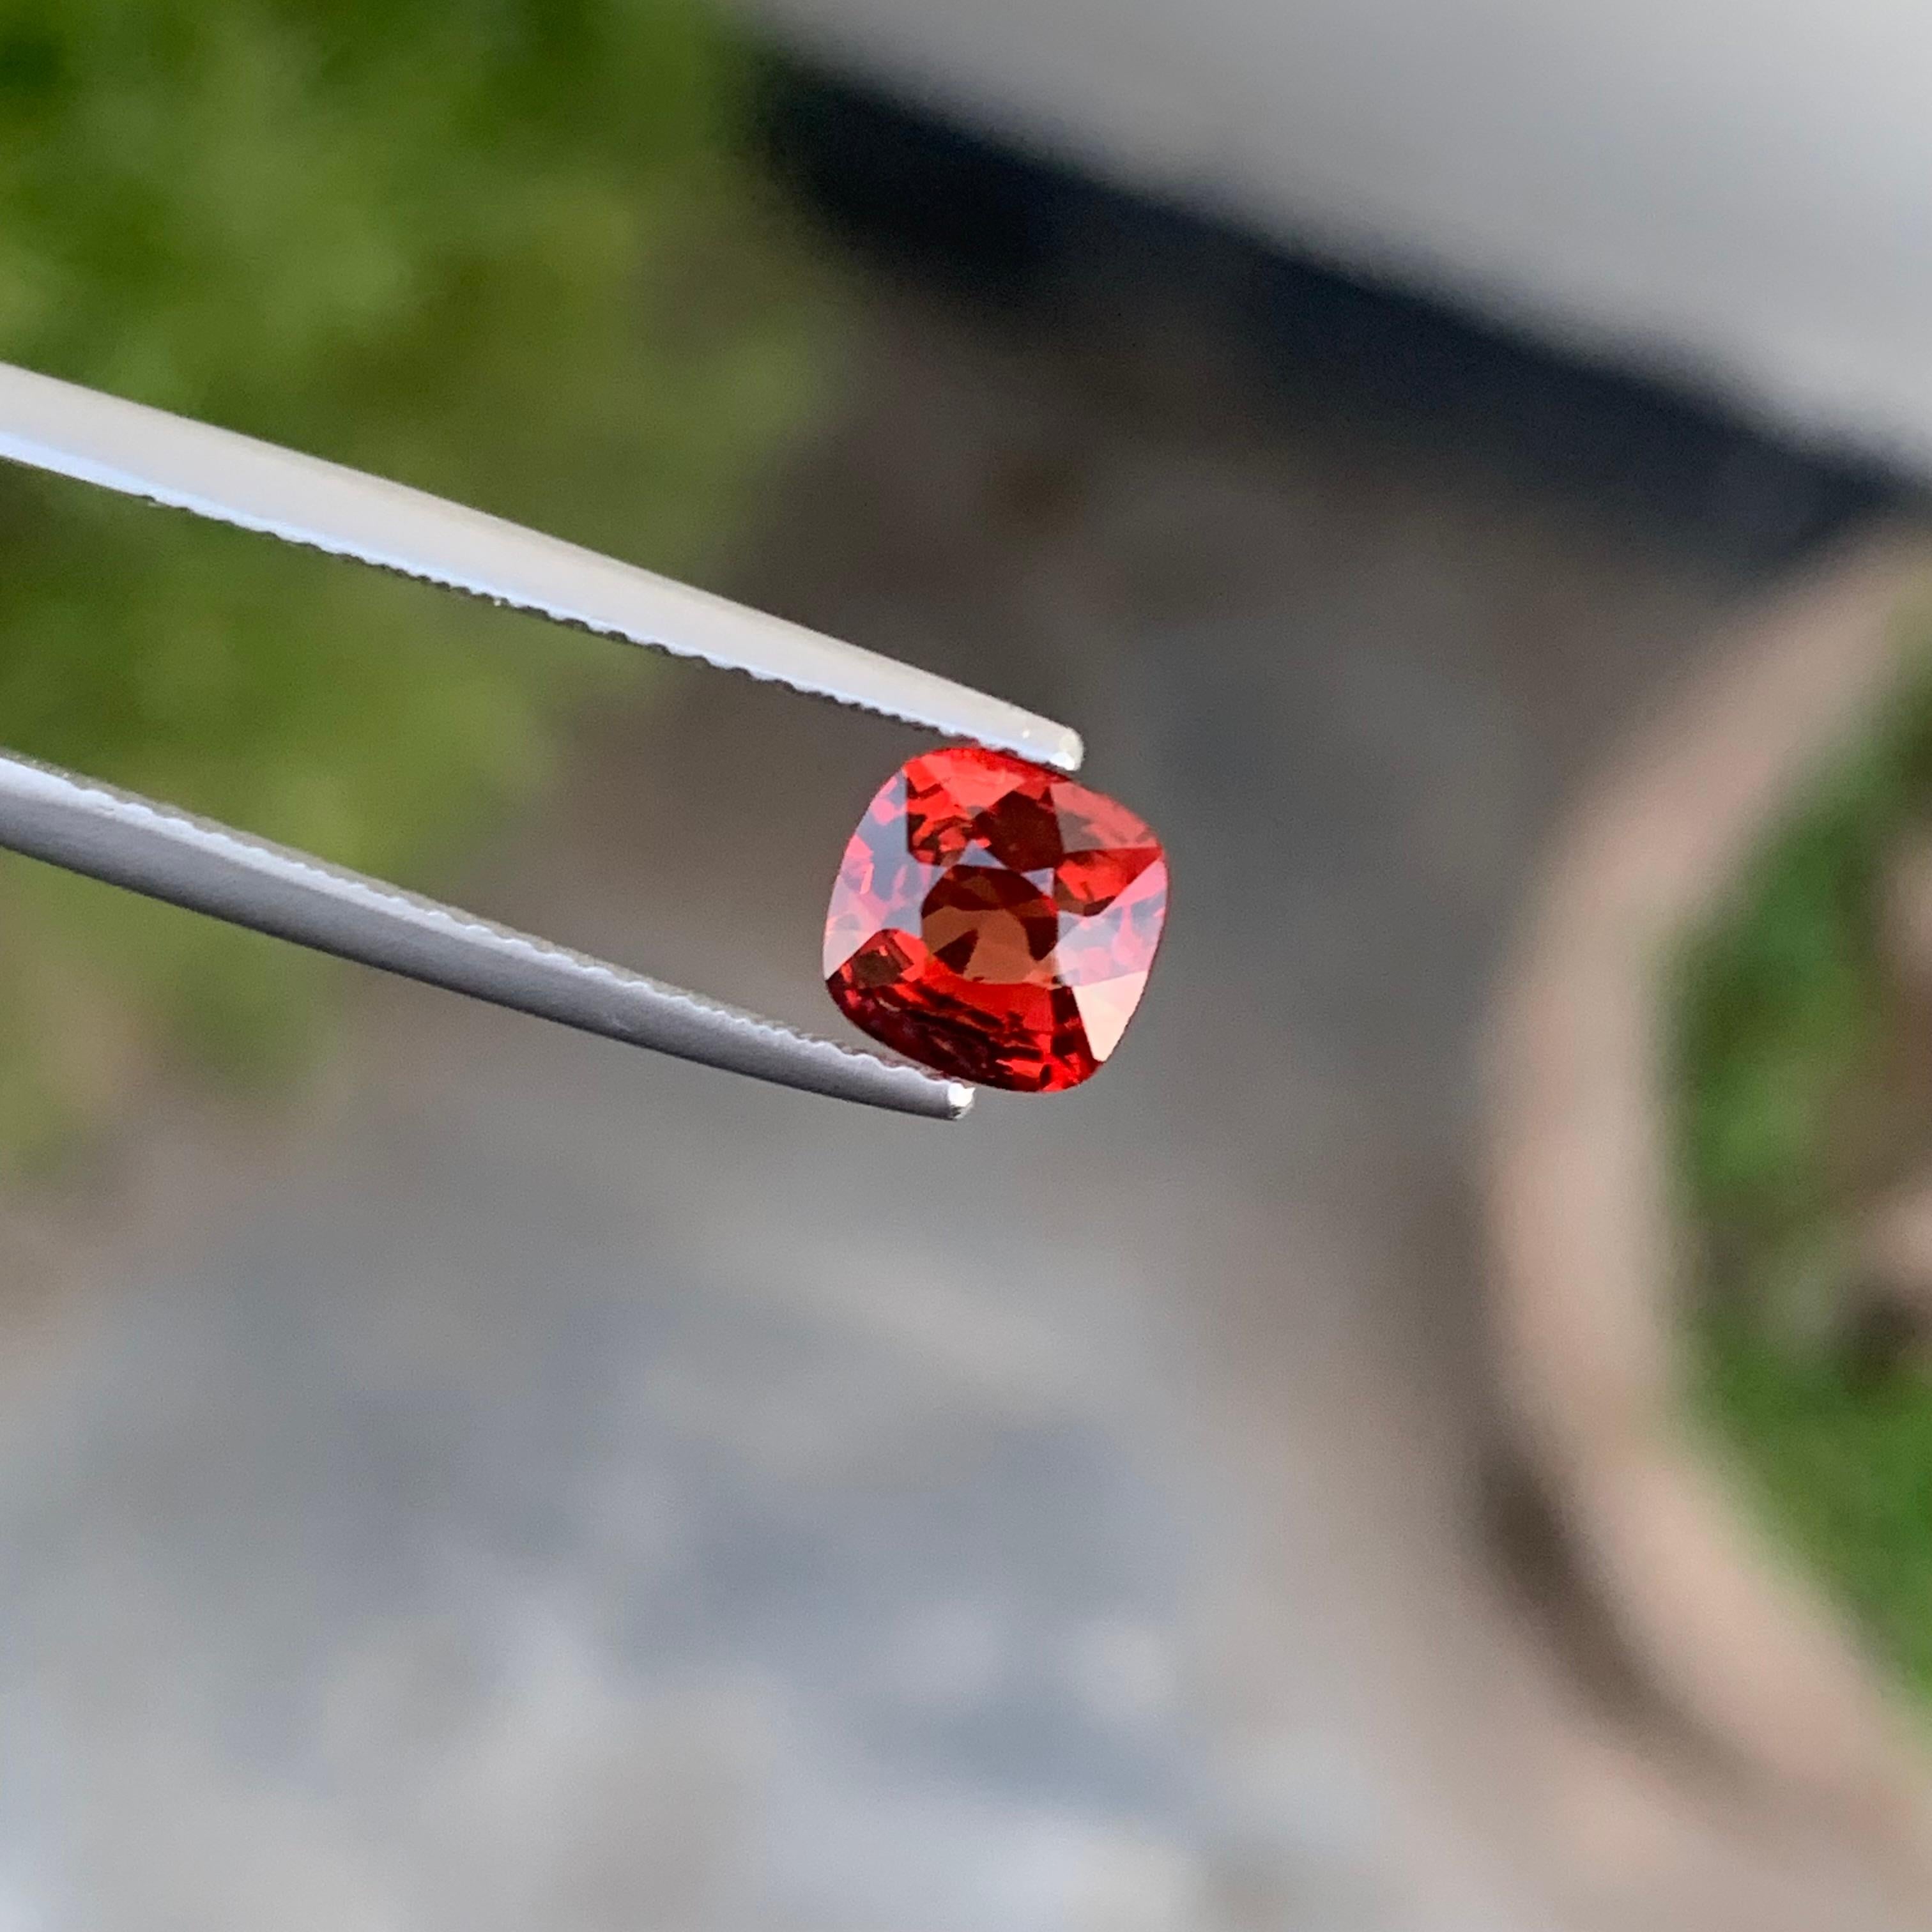 Charming 1.25 Carat Cushion Cut Loose Natural Red Spinel from Burma Myanmar For Sale 3